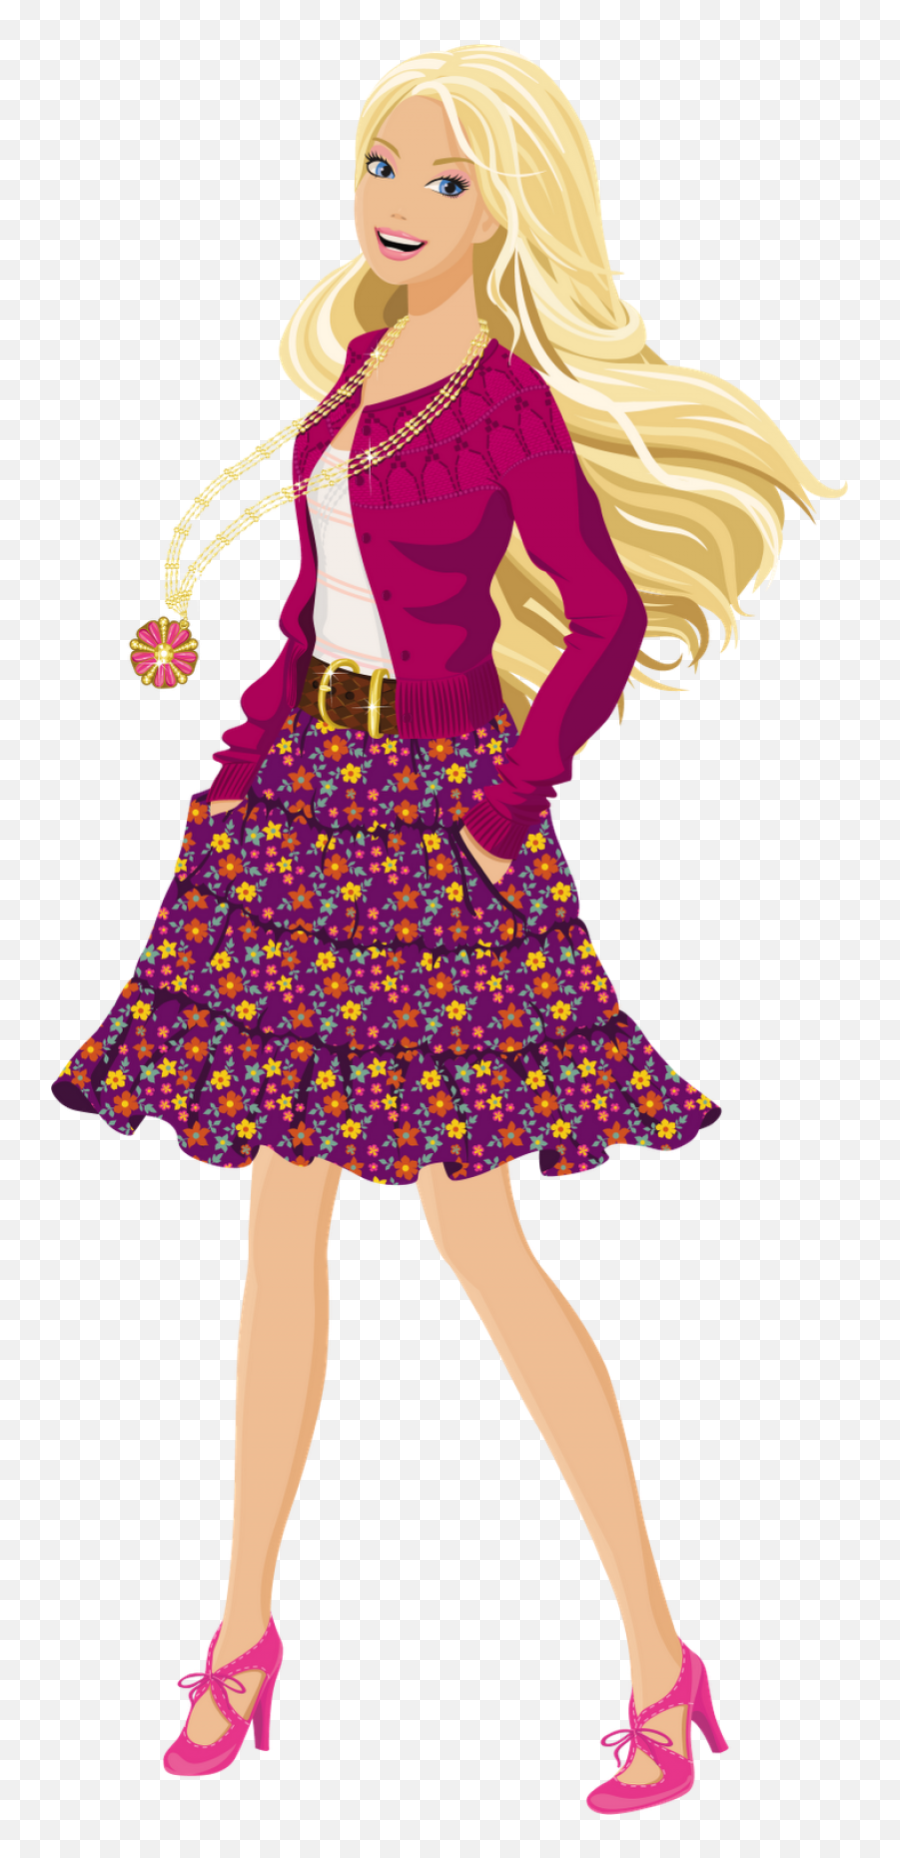 Barbie Doll Png Image - Purepng Free Transparent Cc0 Png Barbie Png,Doll Png